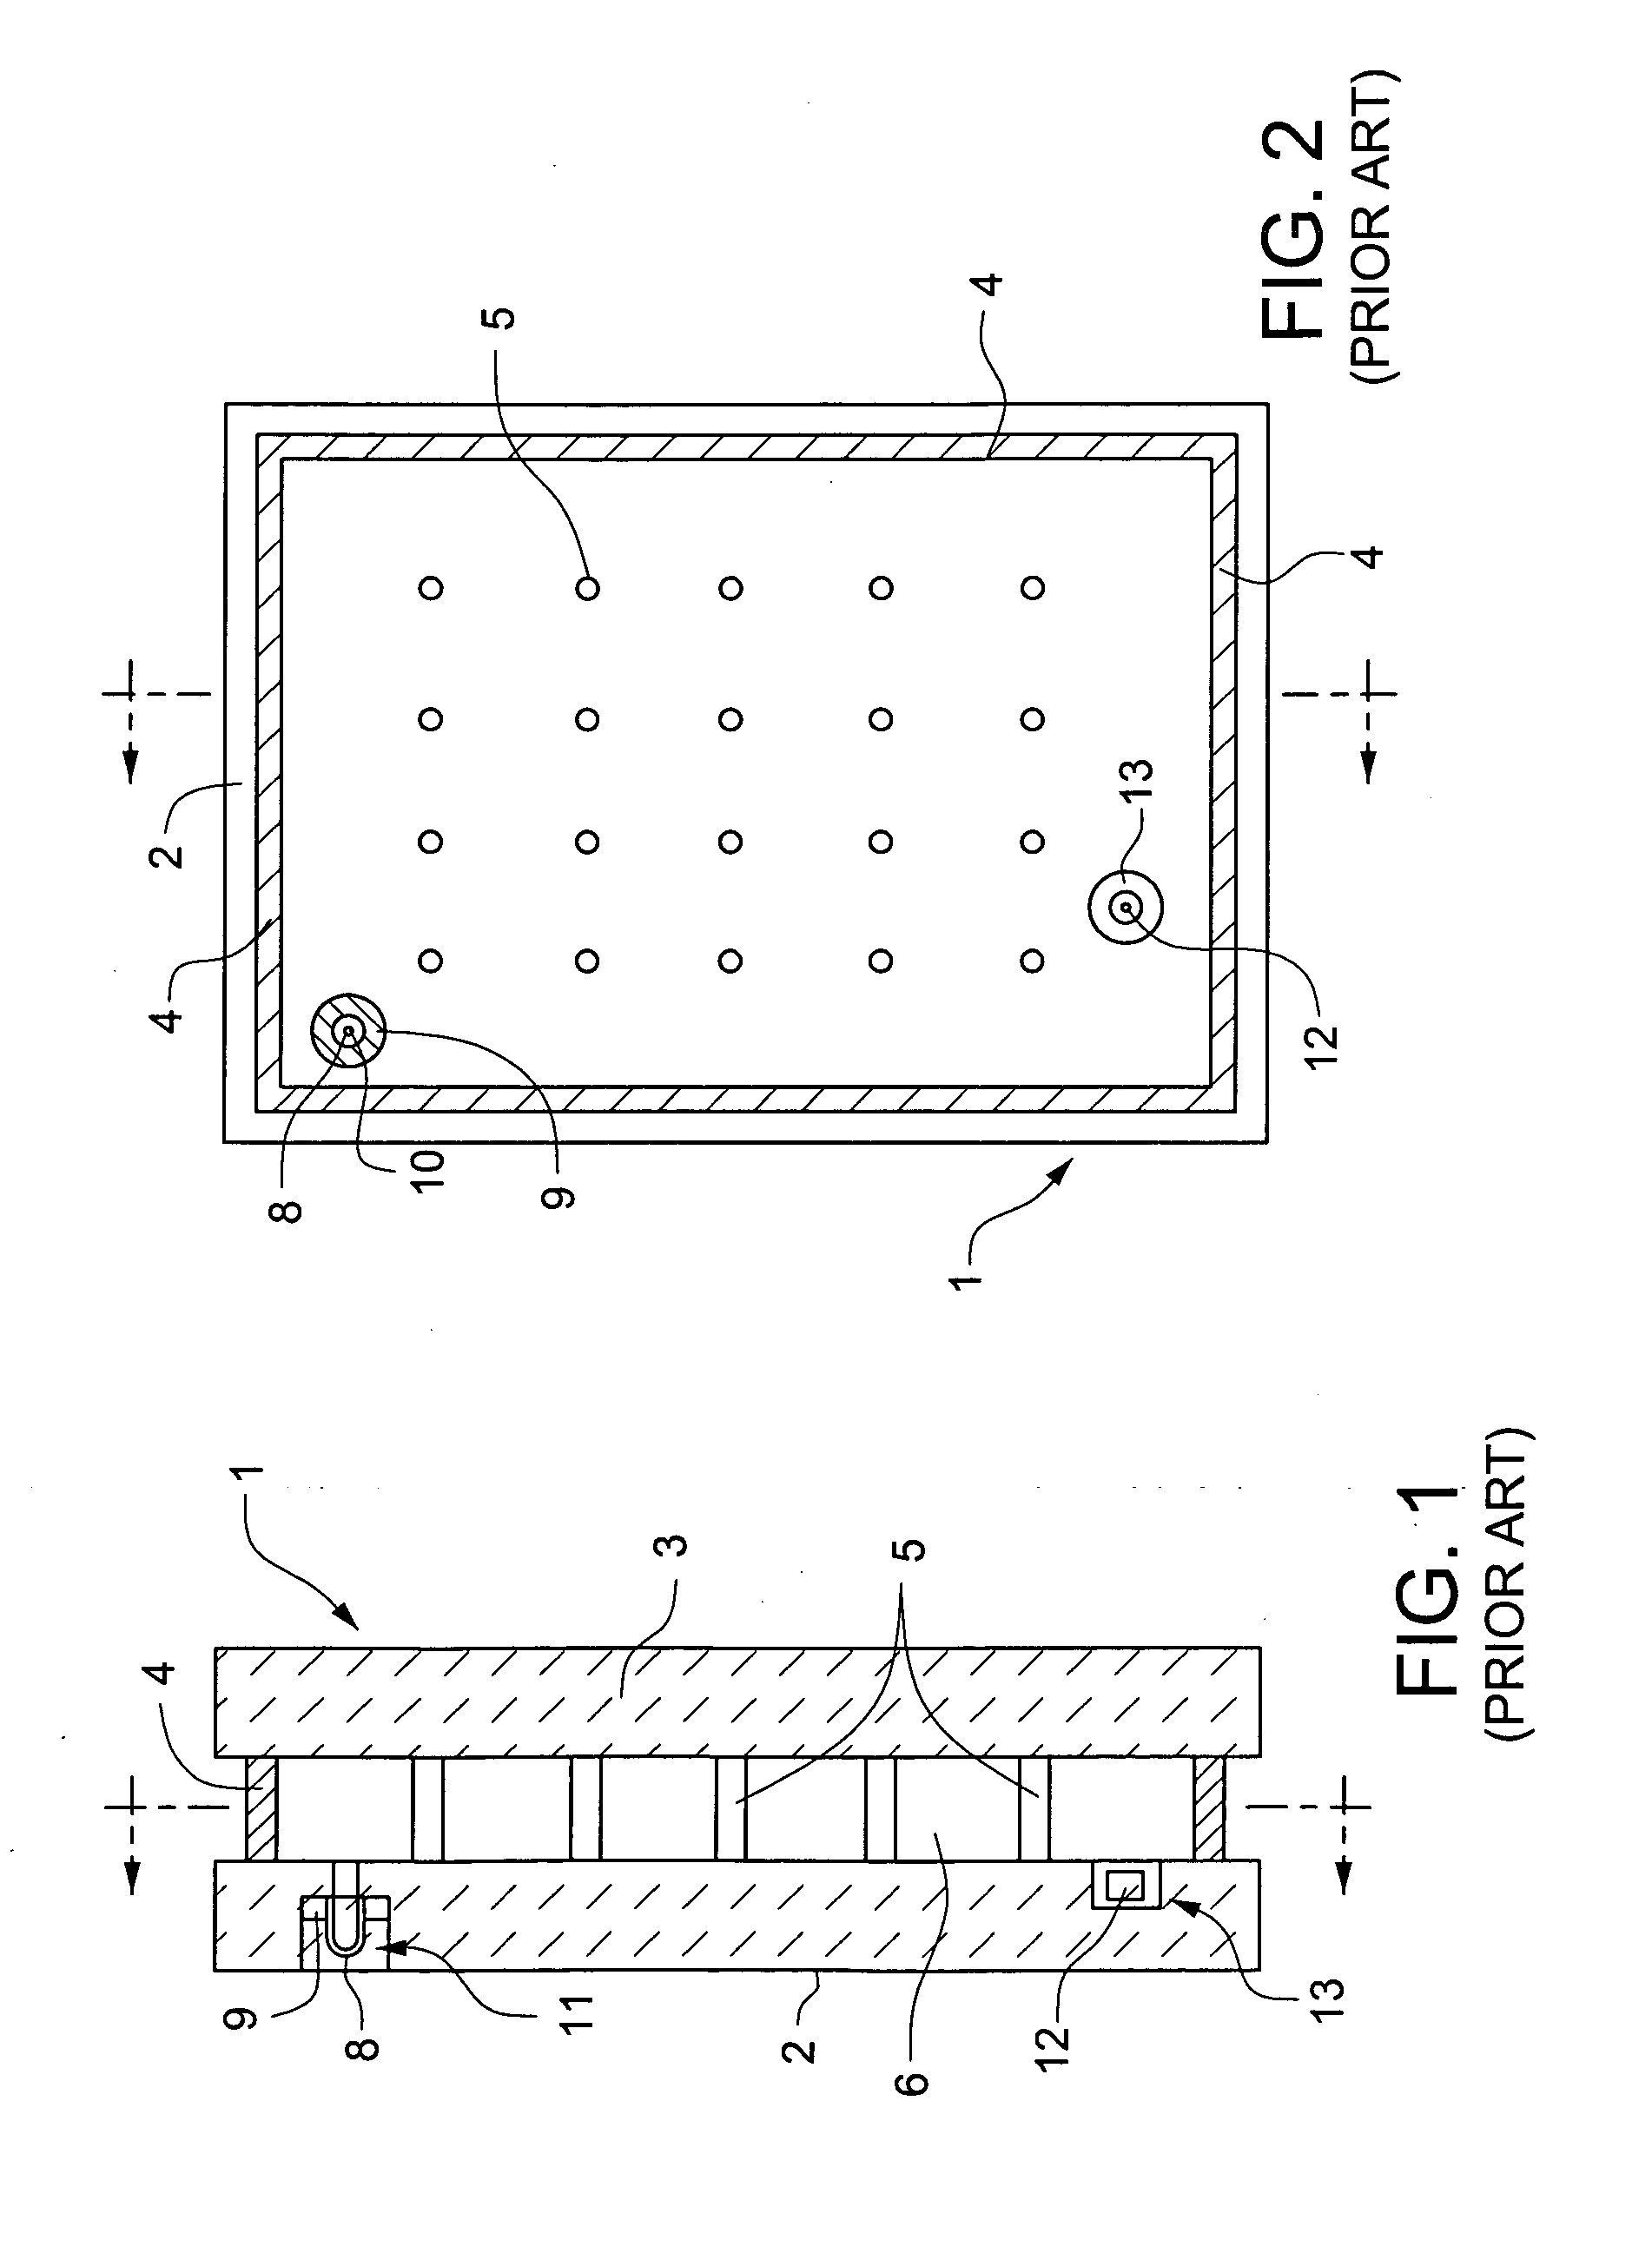 Vacuum insulating glass unit with large pump-out port, and/or method of making the same